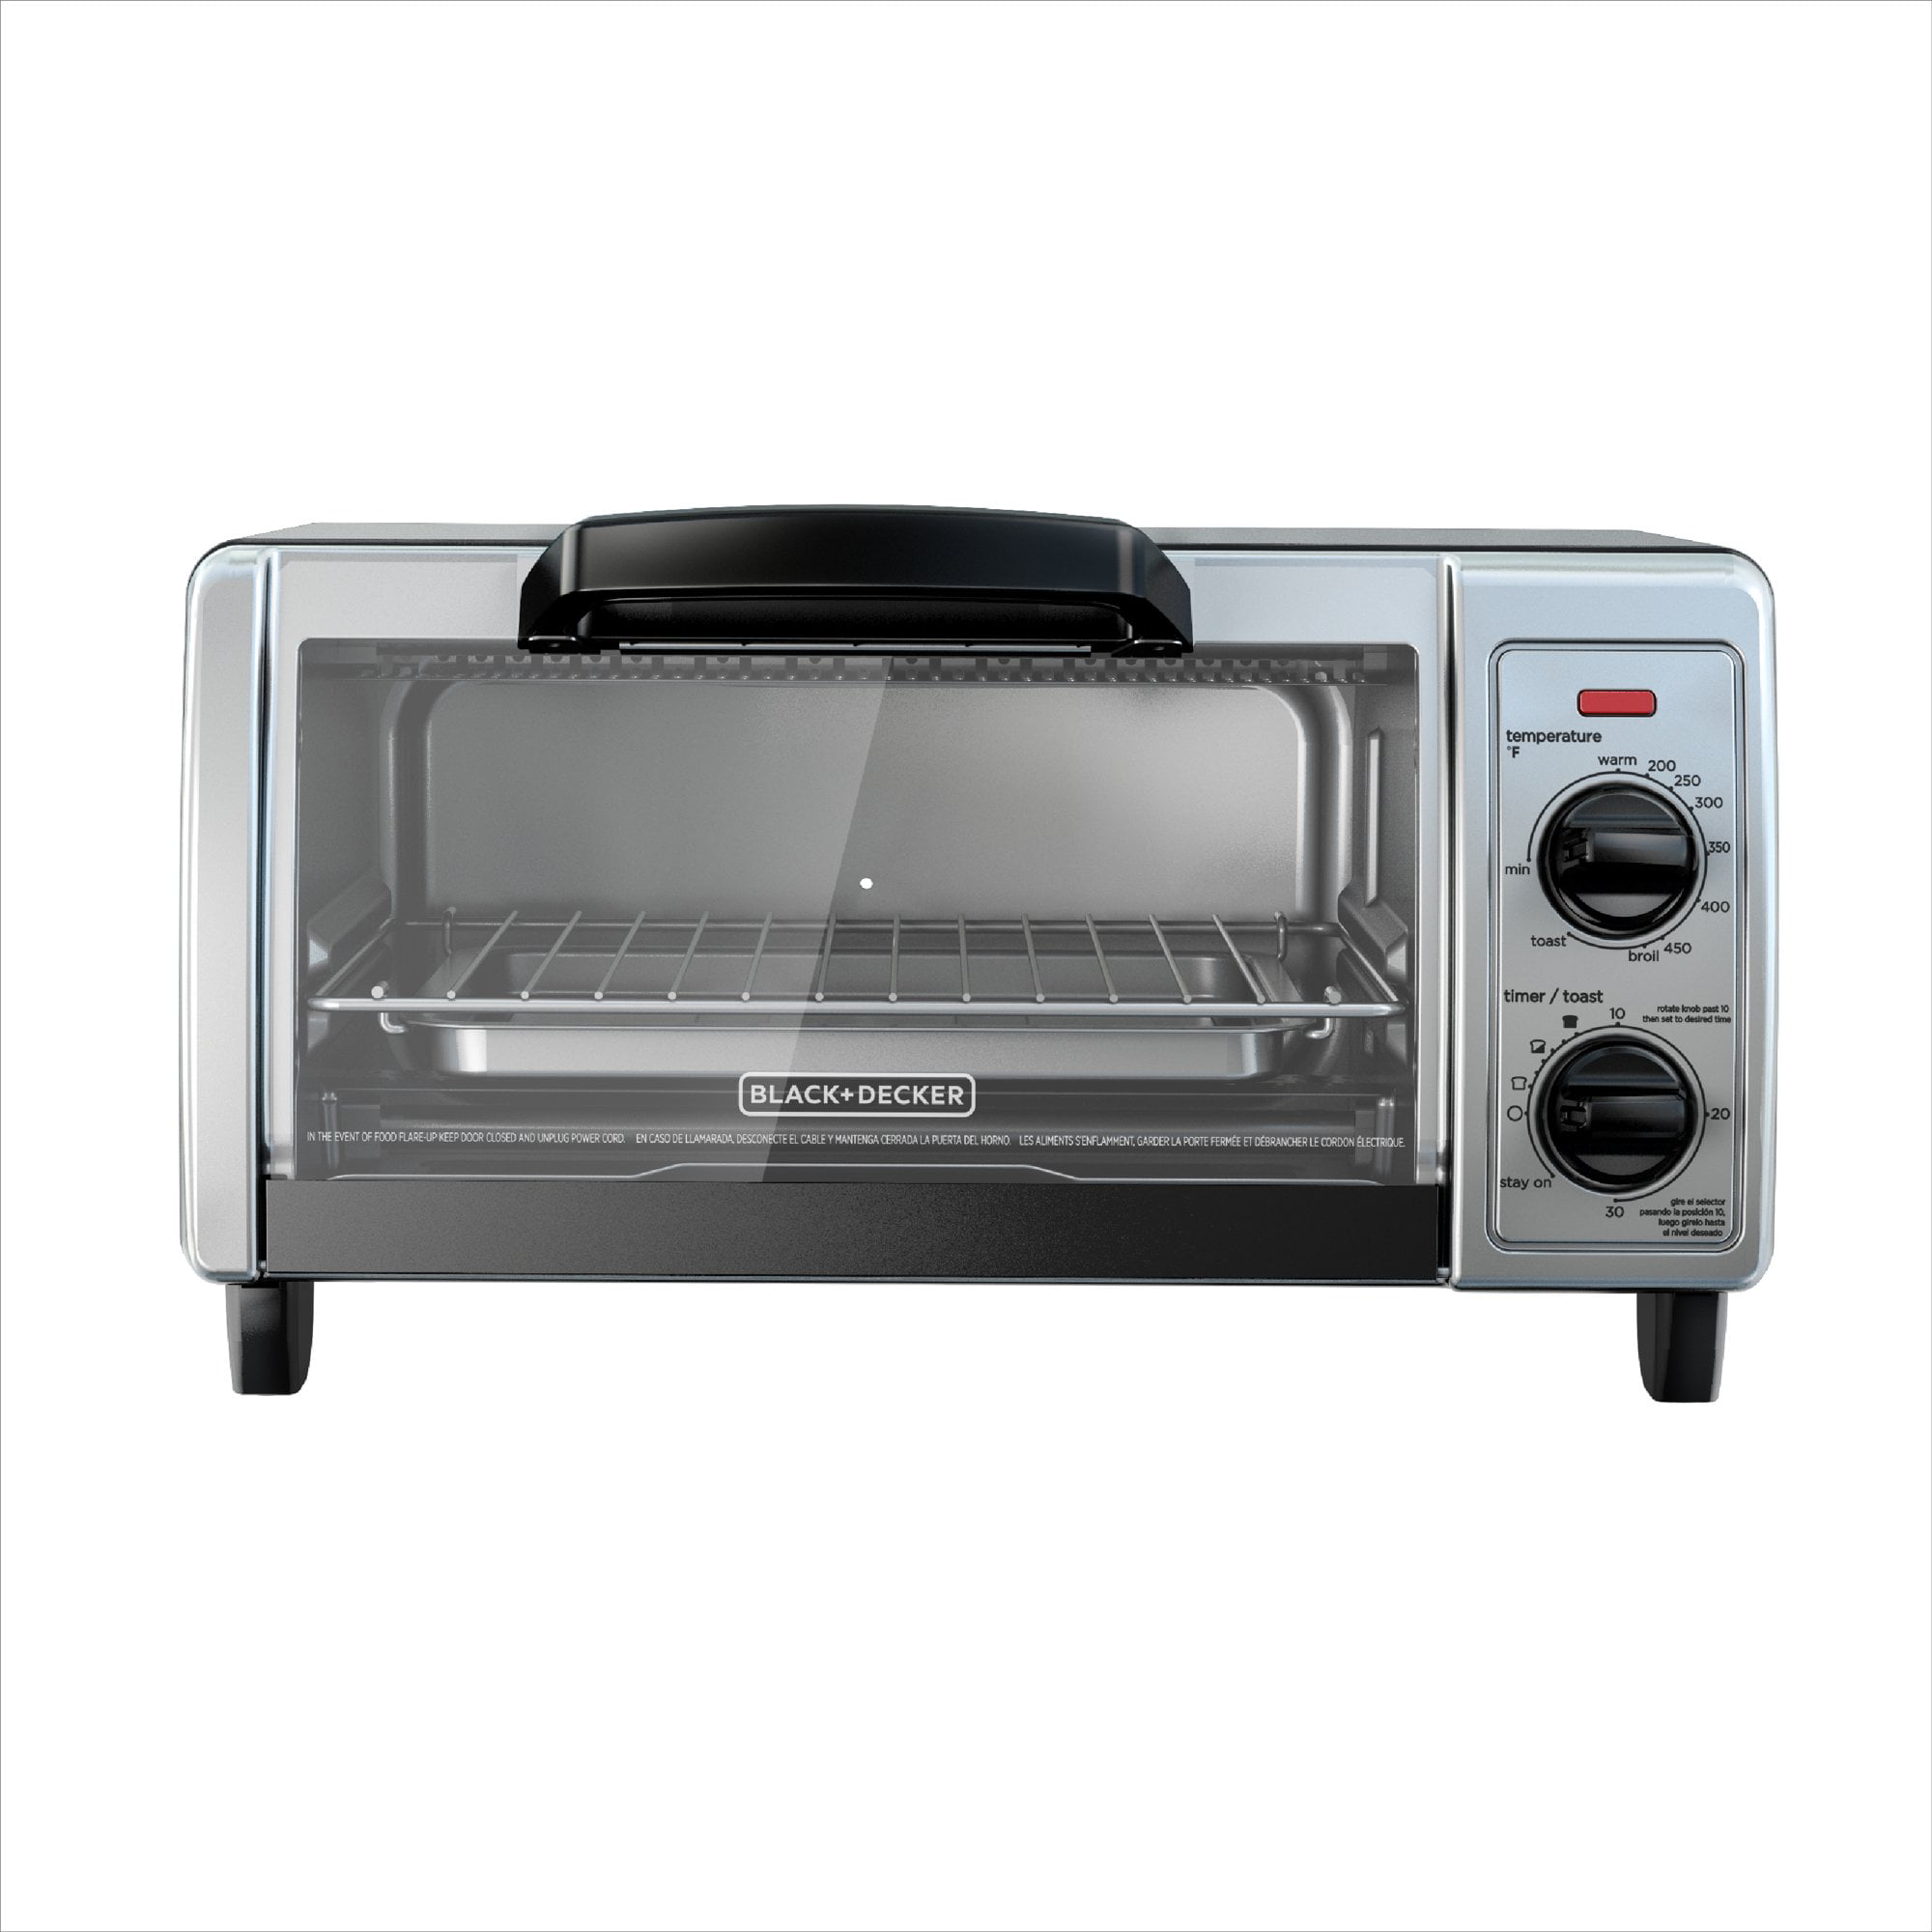 Black+Decker 4-Slice TO1755SB Toaster & Toaster Oven Review